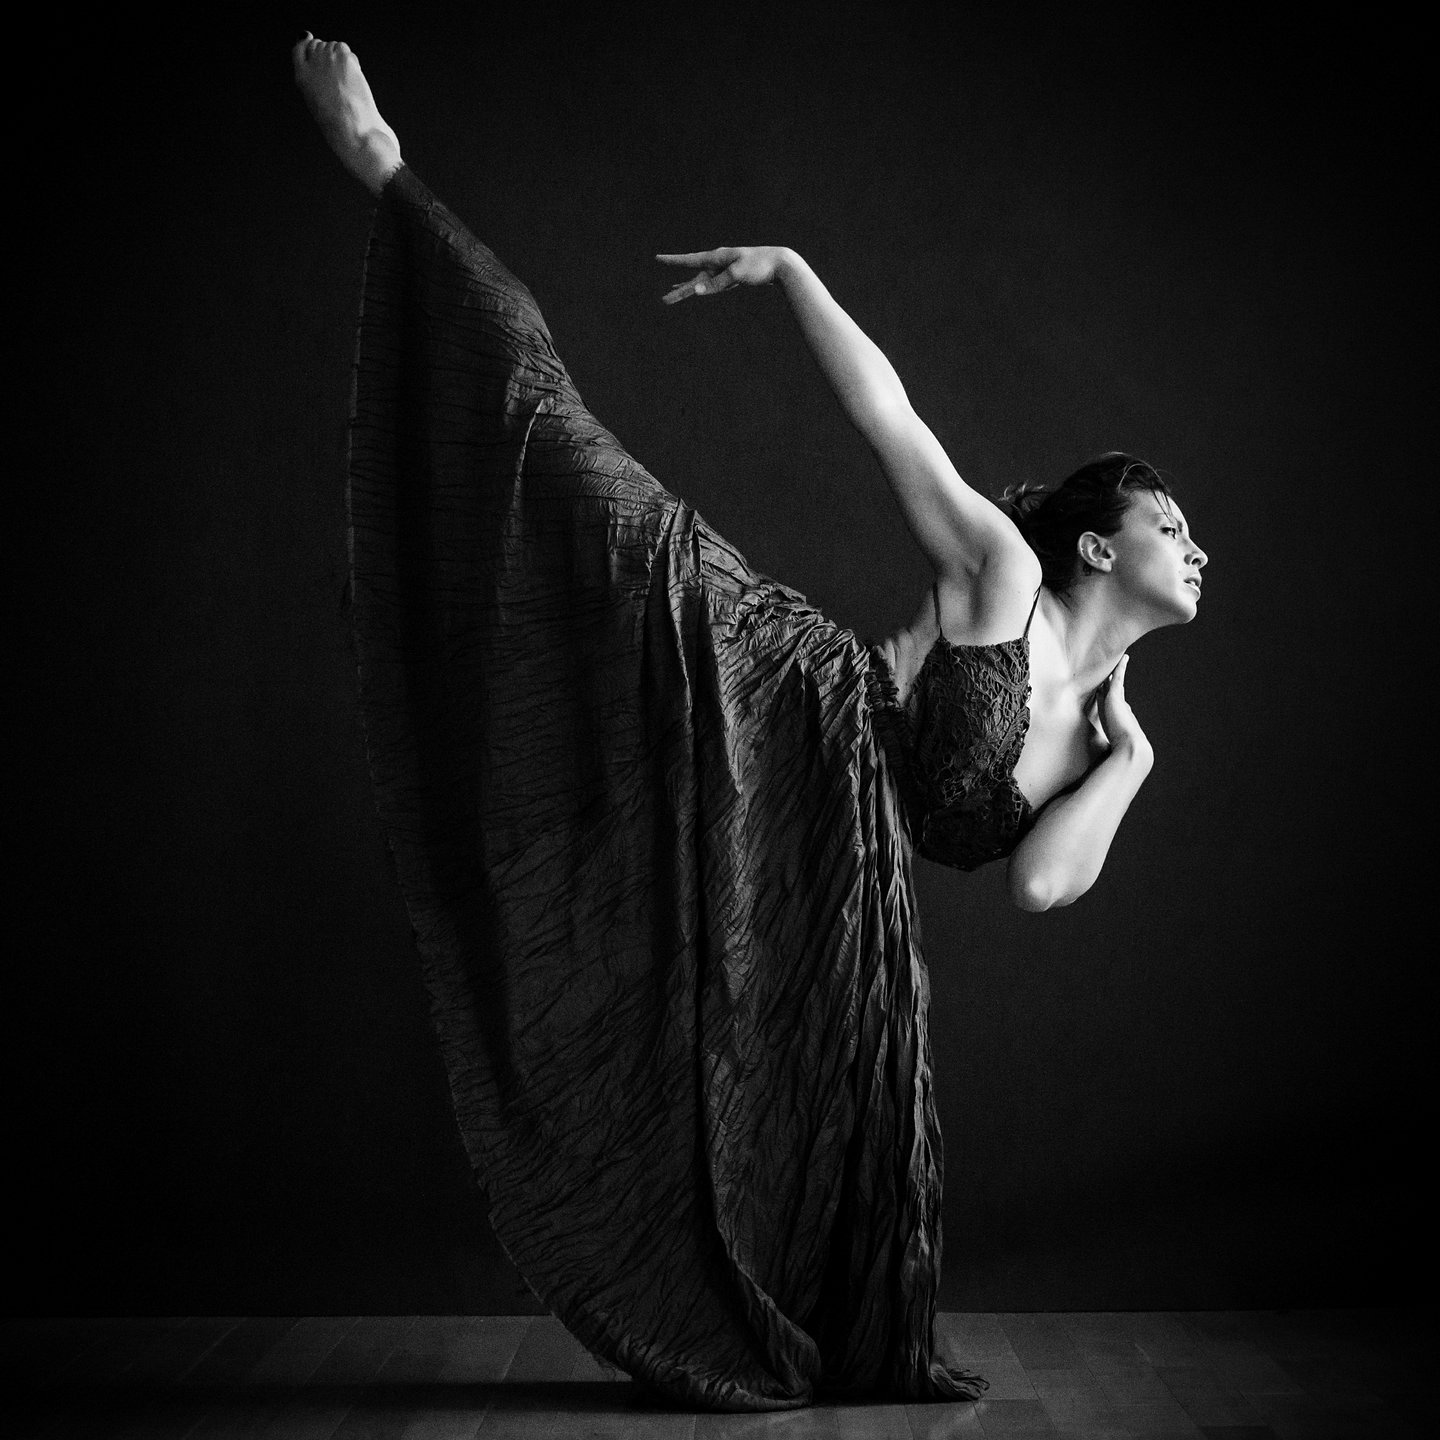 Los Angeles Dance Portrait Photo - Stephanie Abrams - by Tommy Xing Photography 17.jpg